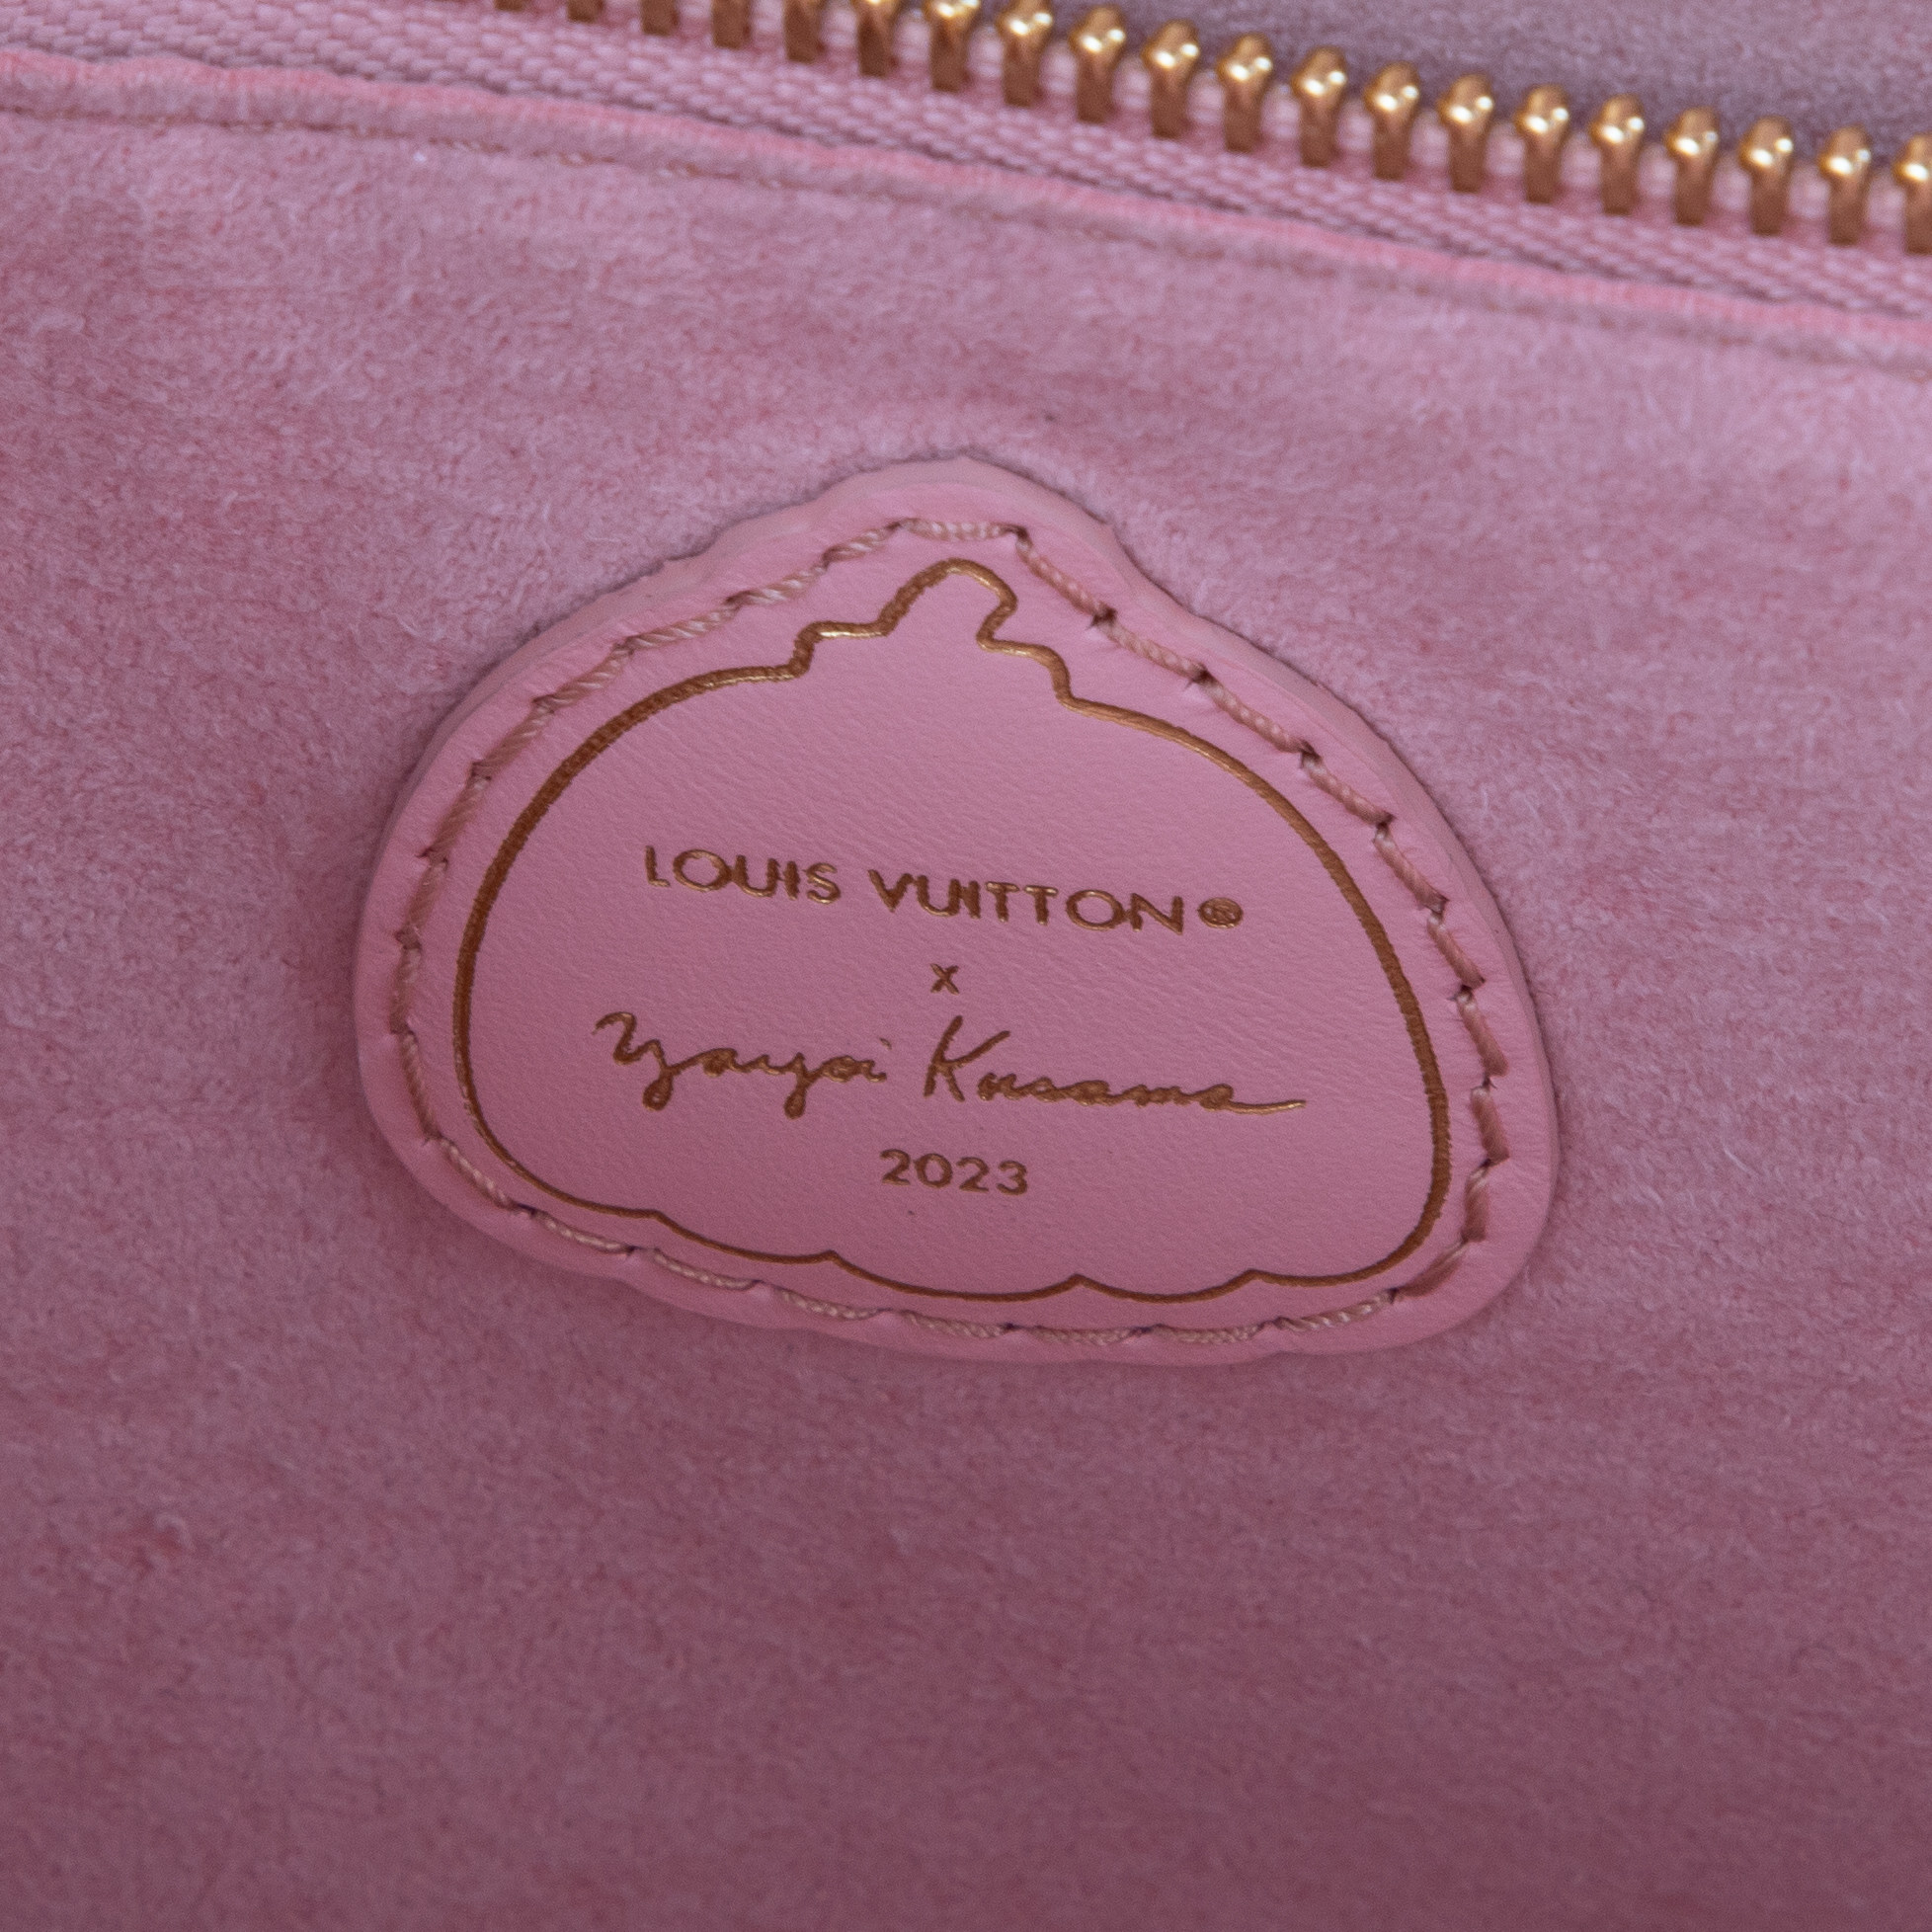 Louis Vuitton - Authenticated Handbag - Cloth Pink Floral for Women, Very Good Condition